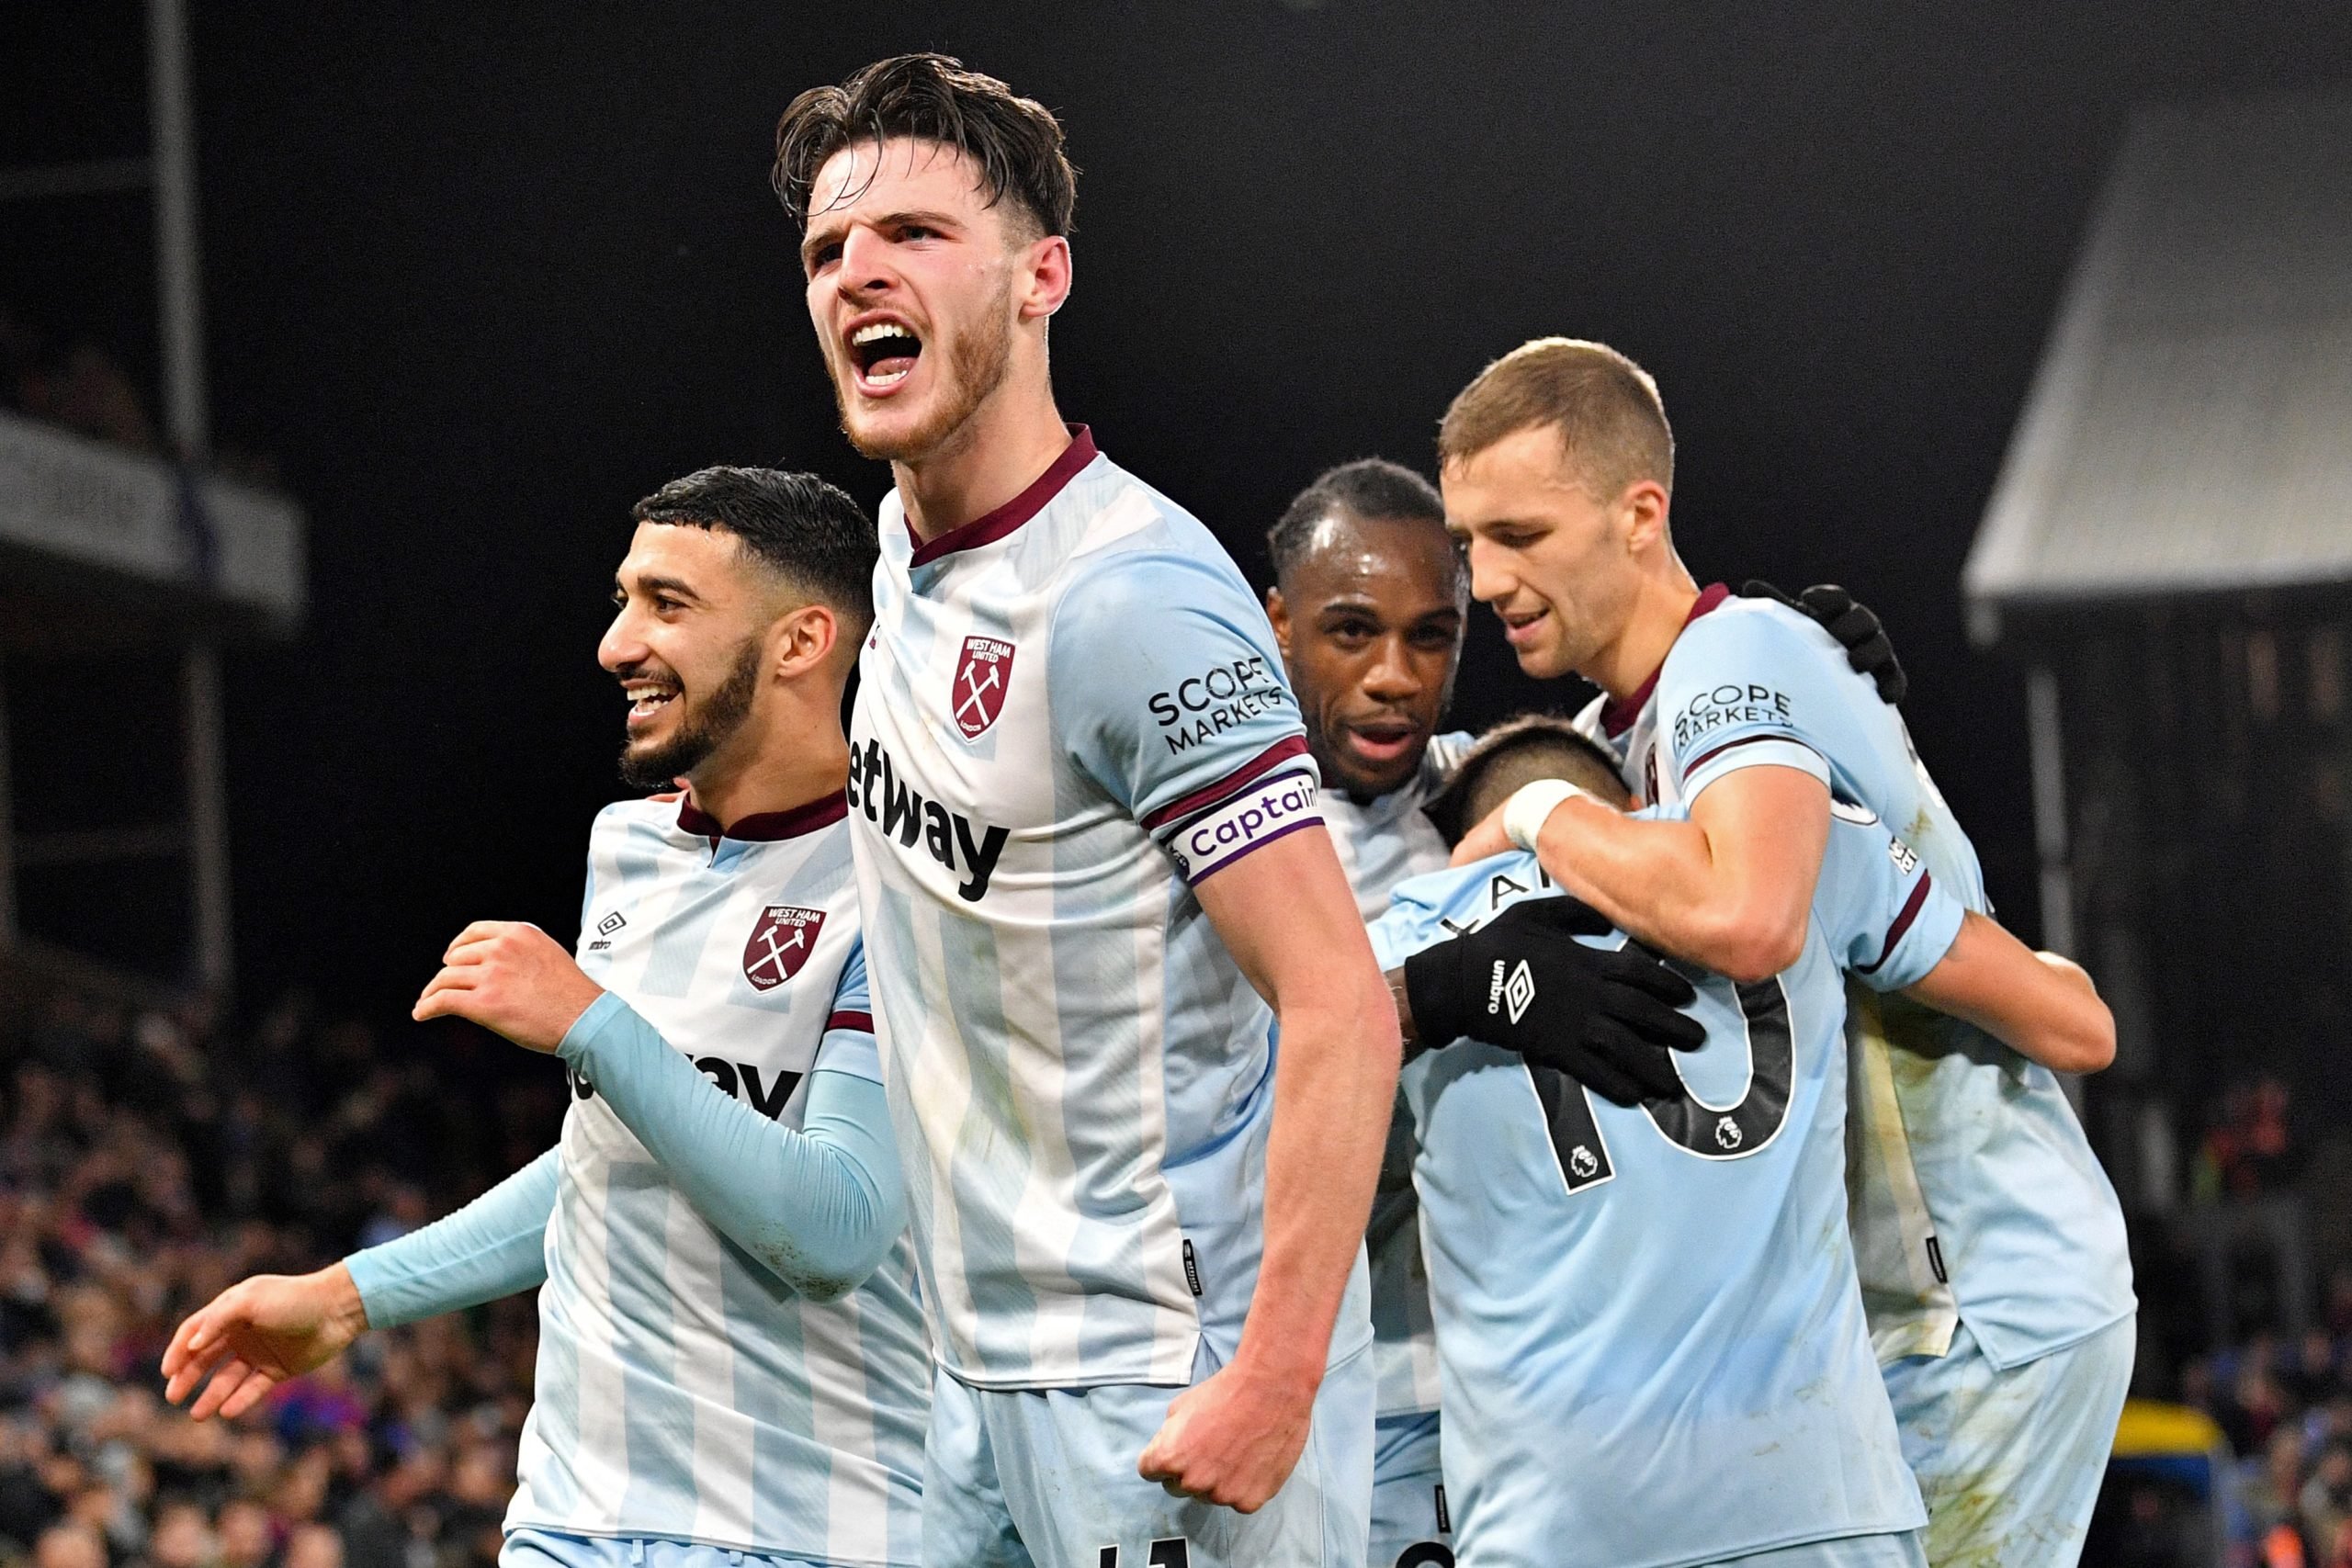 West Ham stars Declan Rice and Michail Antonio absolutely rave about what they saw at Crystal Palace